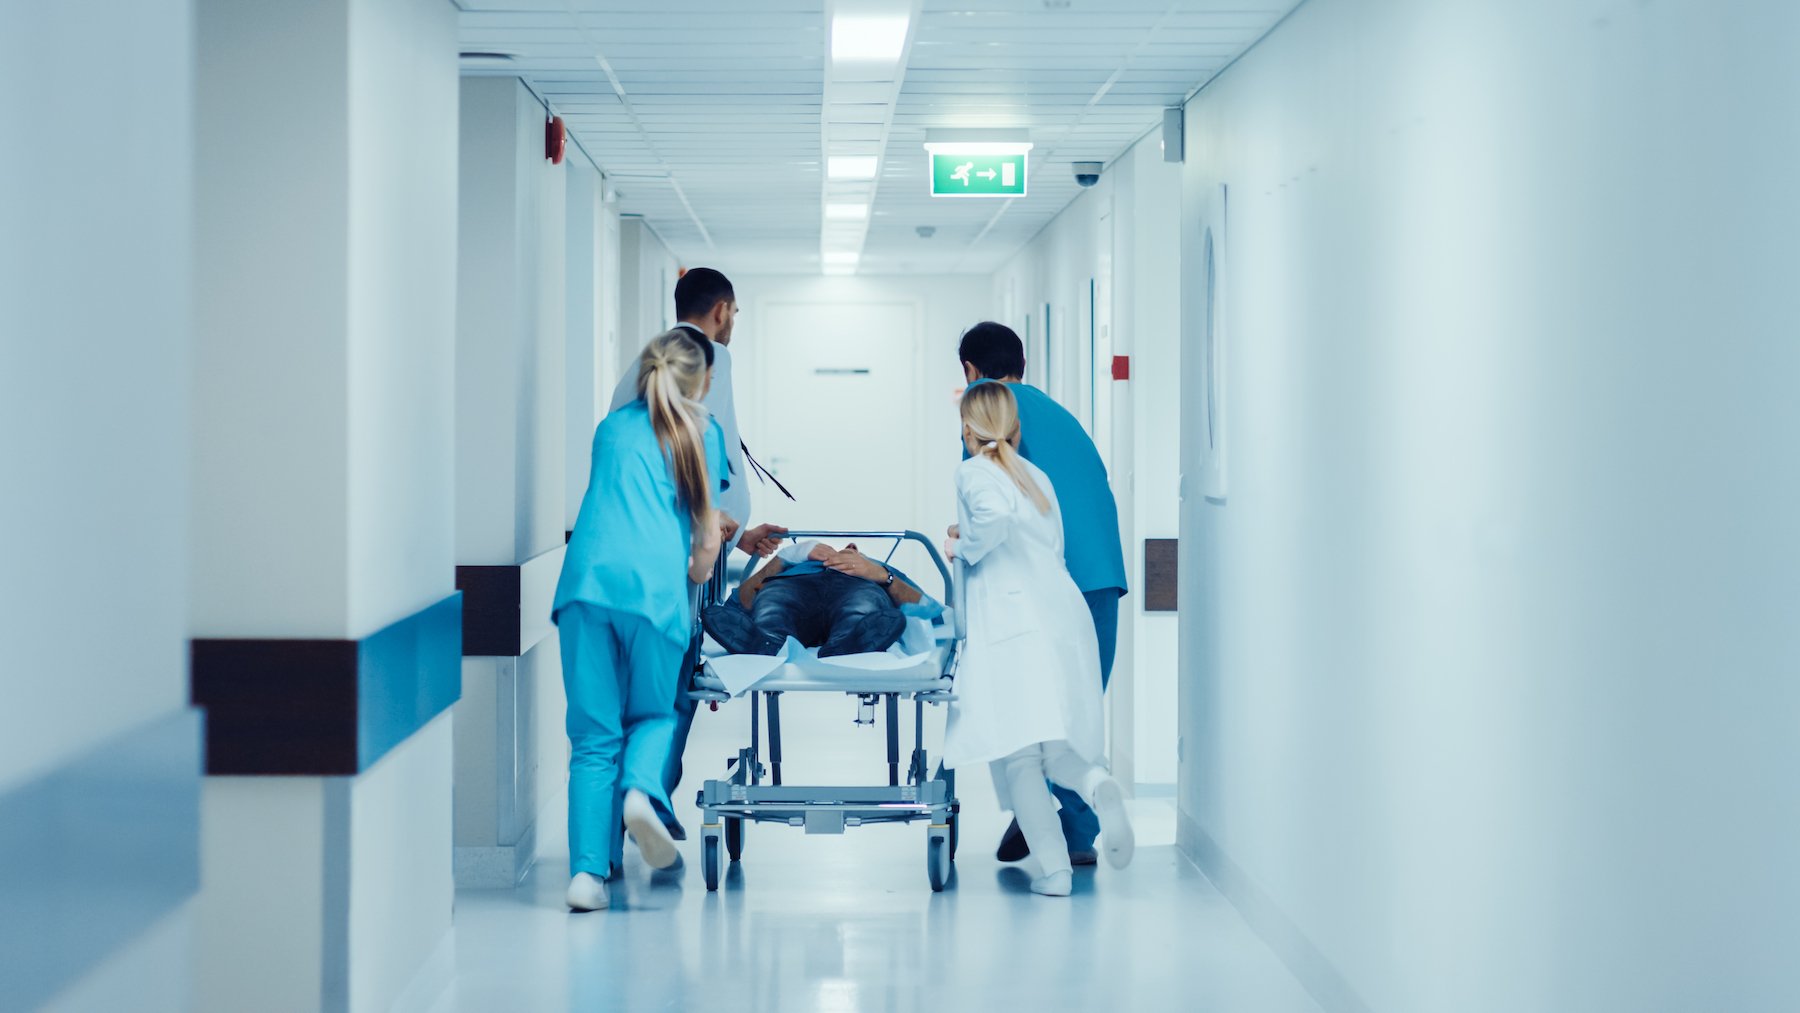 Three common reasons for an ER visit, and how to prevent them